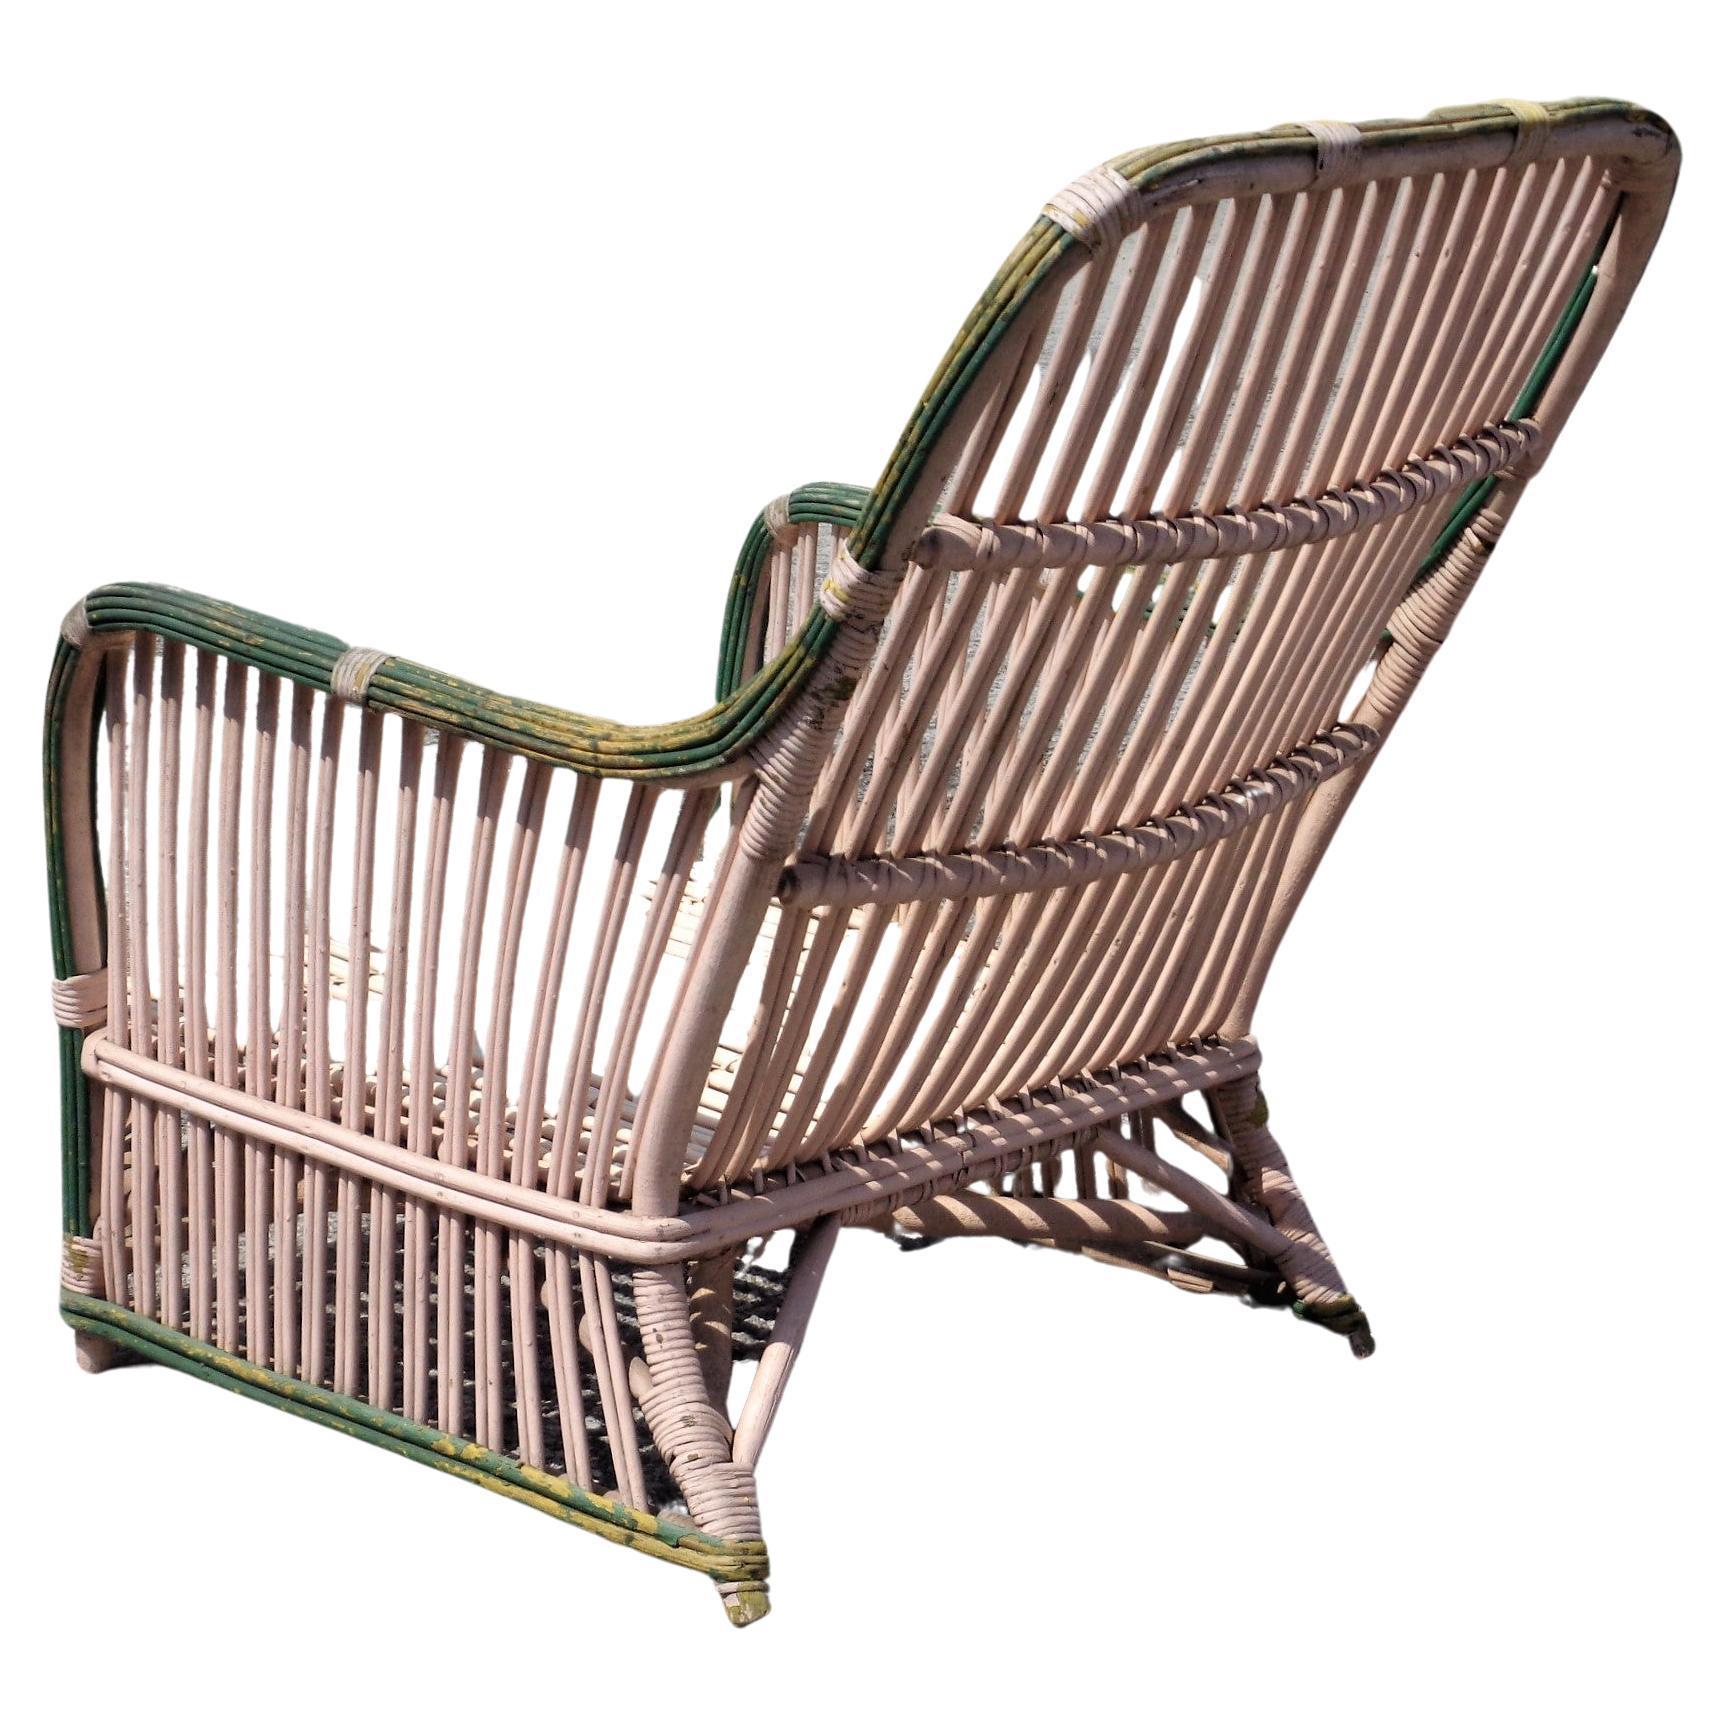  American Art Deco Stick Wicker Lounge Chair, Circa 1930 In Good Condition For Sale In Rochester, NY